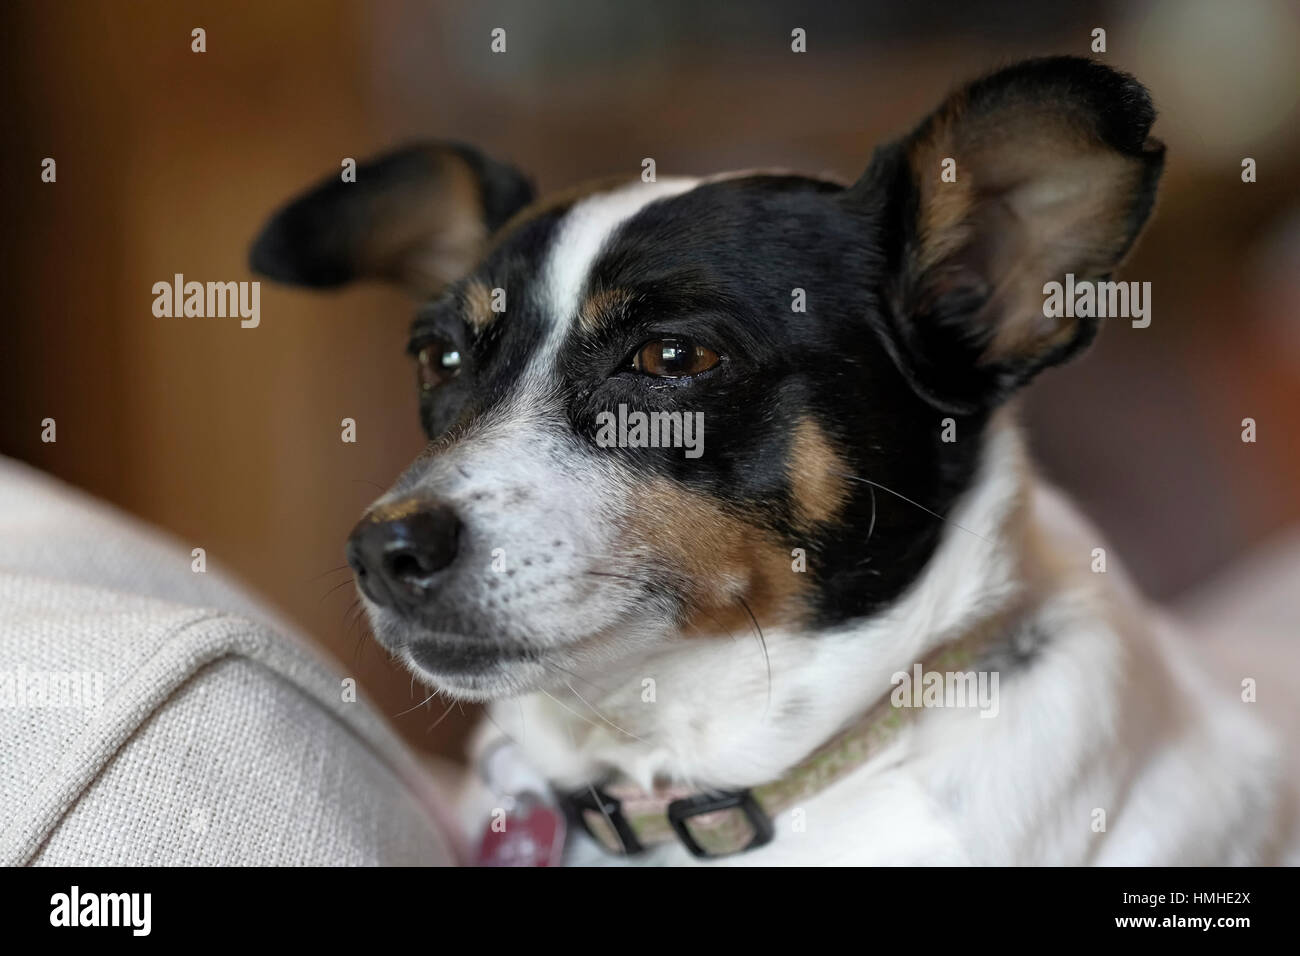 Rat Terrier dog on sofa looking out window. Black and white dog. Stock Photo